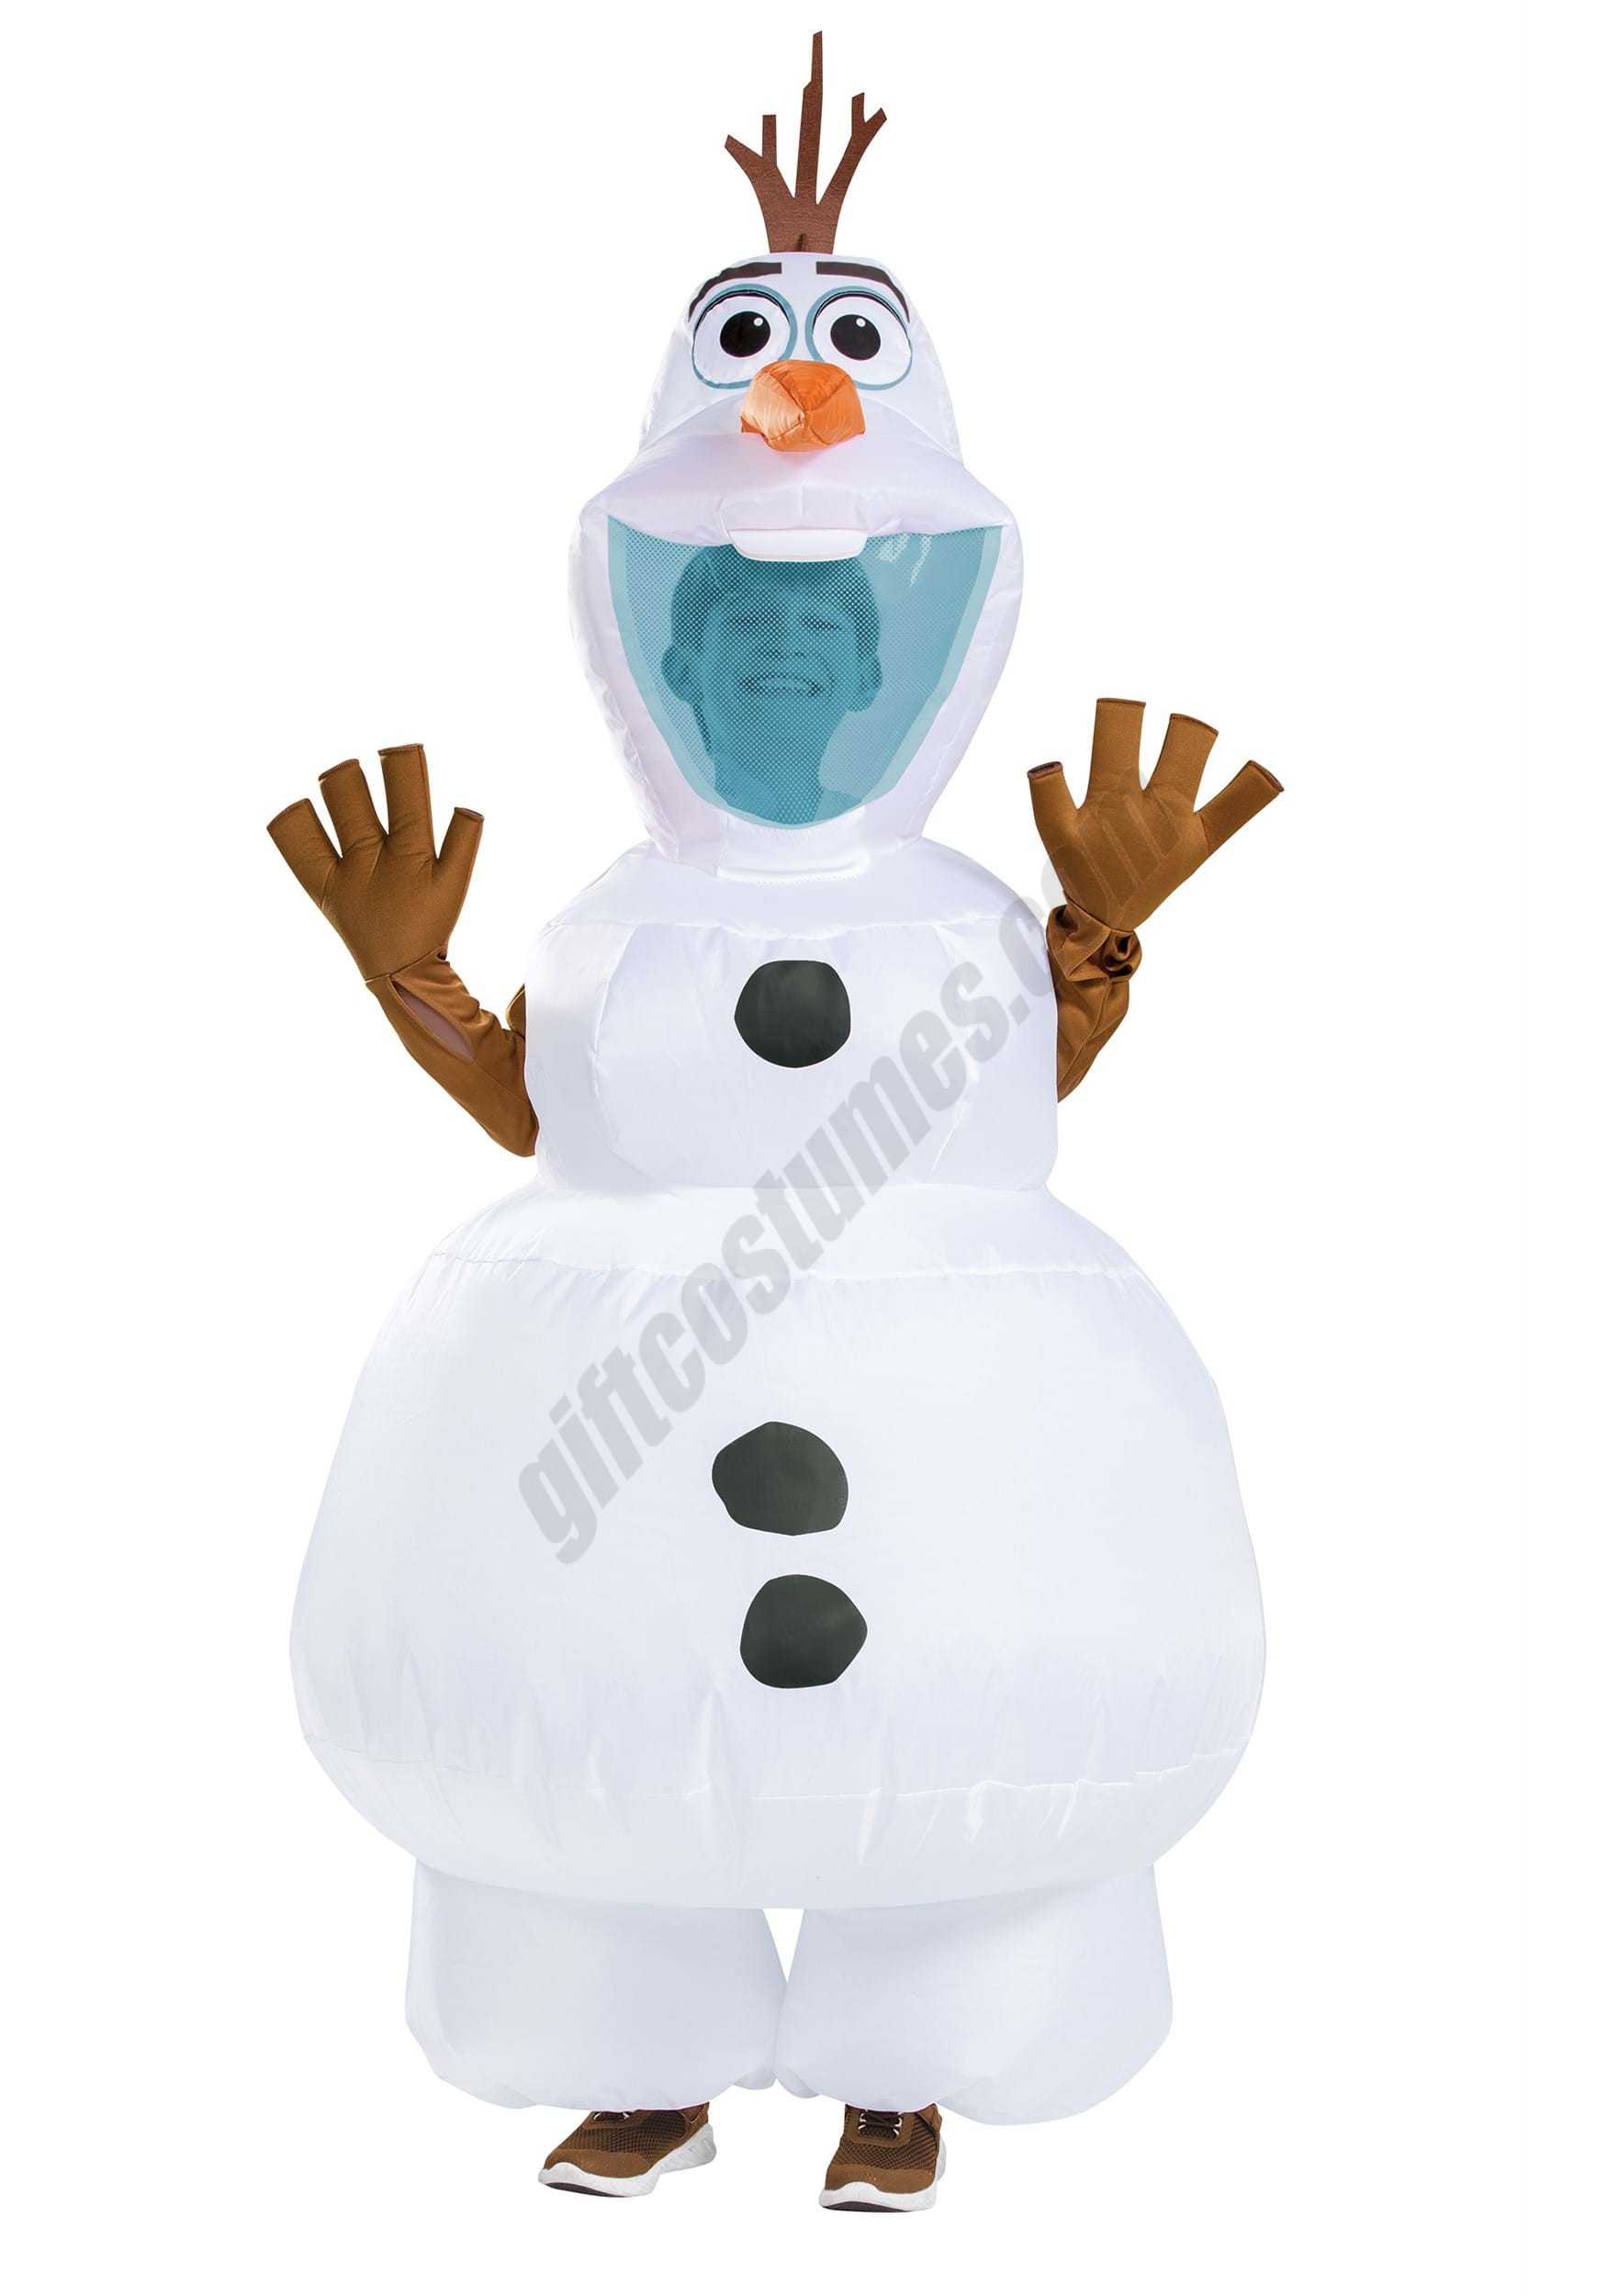 Frozen Kids Olaf Inflatable Costume Promotions - Frozen Kids Olaf Inflatable Costume Promotions